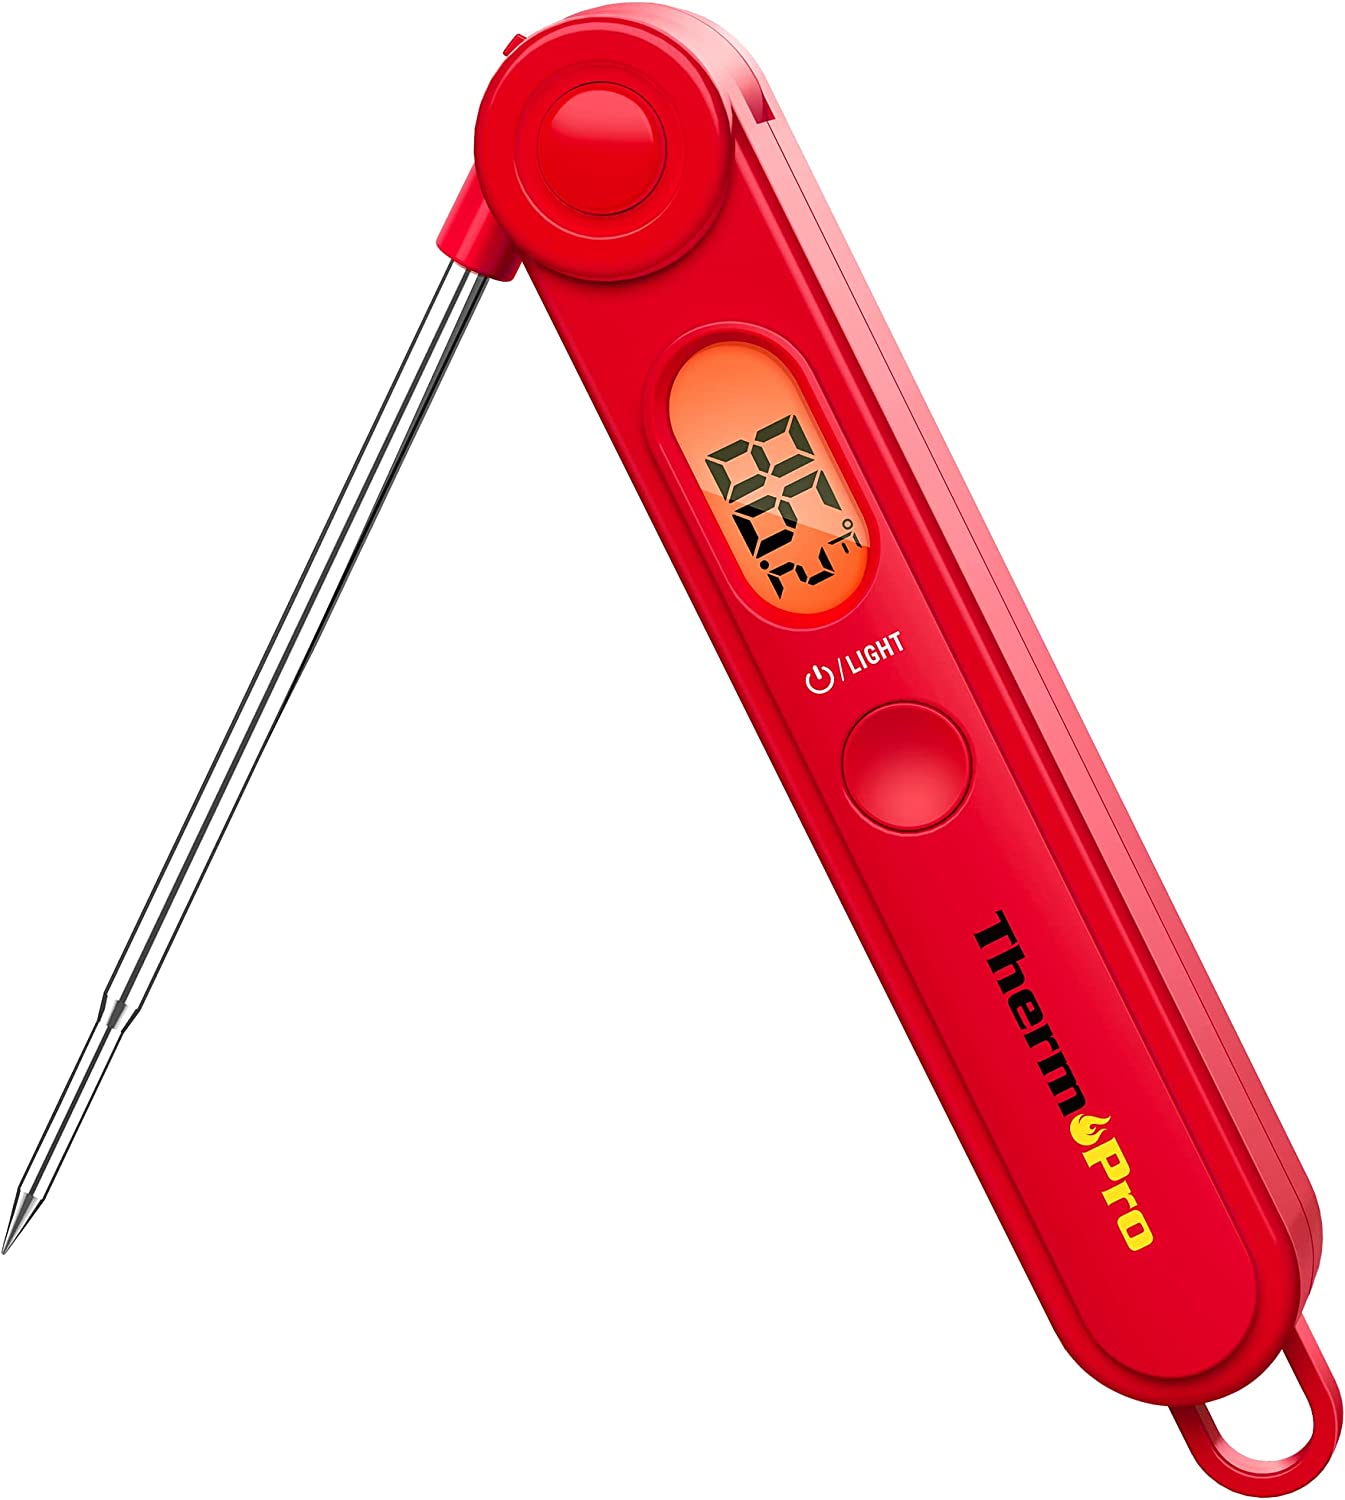 inexpensive instant read thermometer detailed review